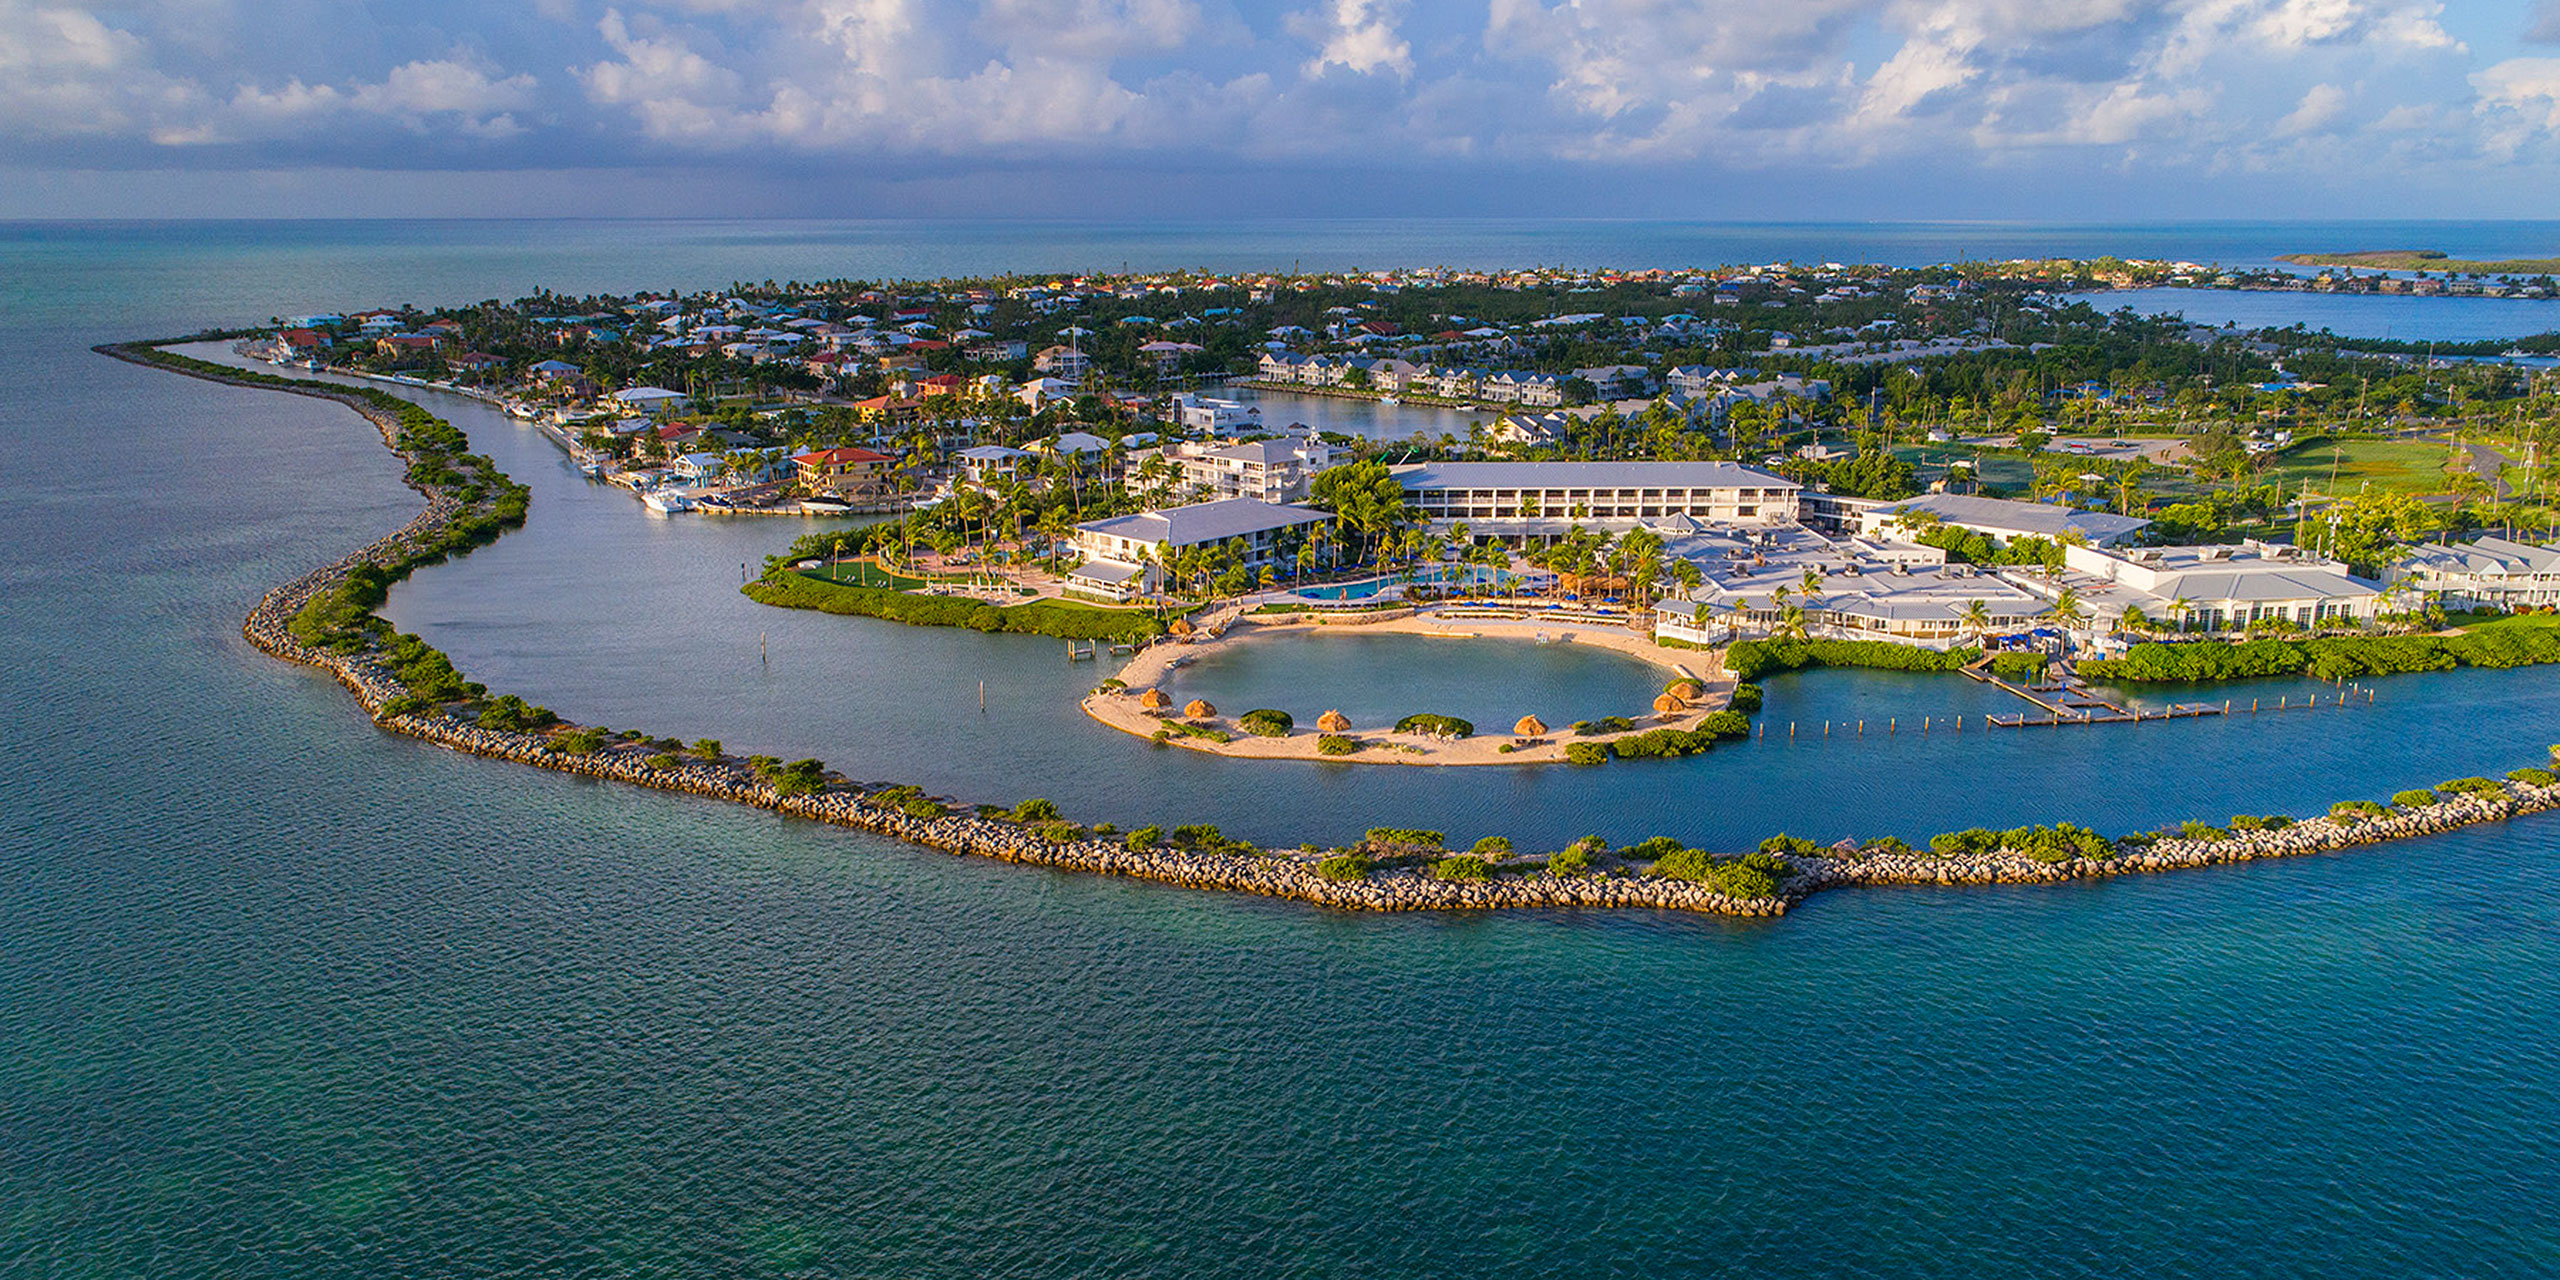 Florida Keys hotel seen from the air